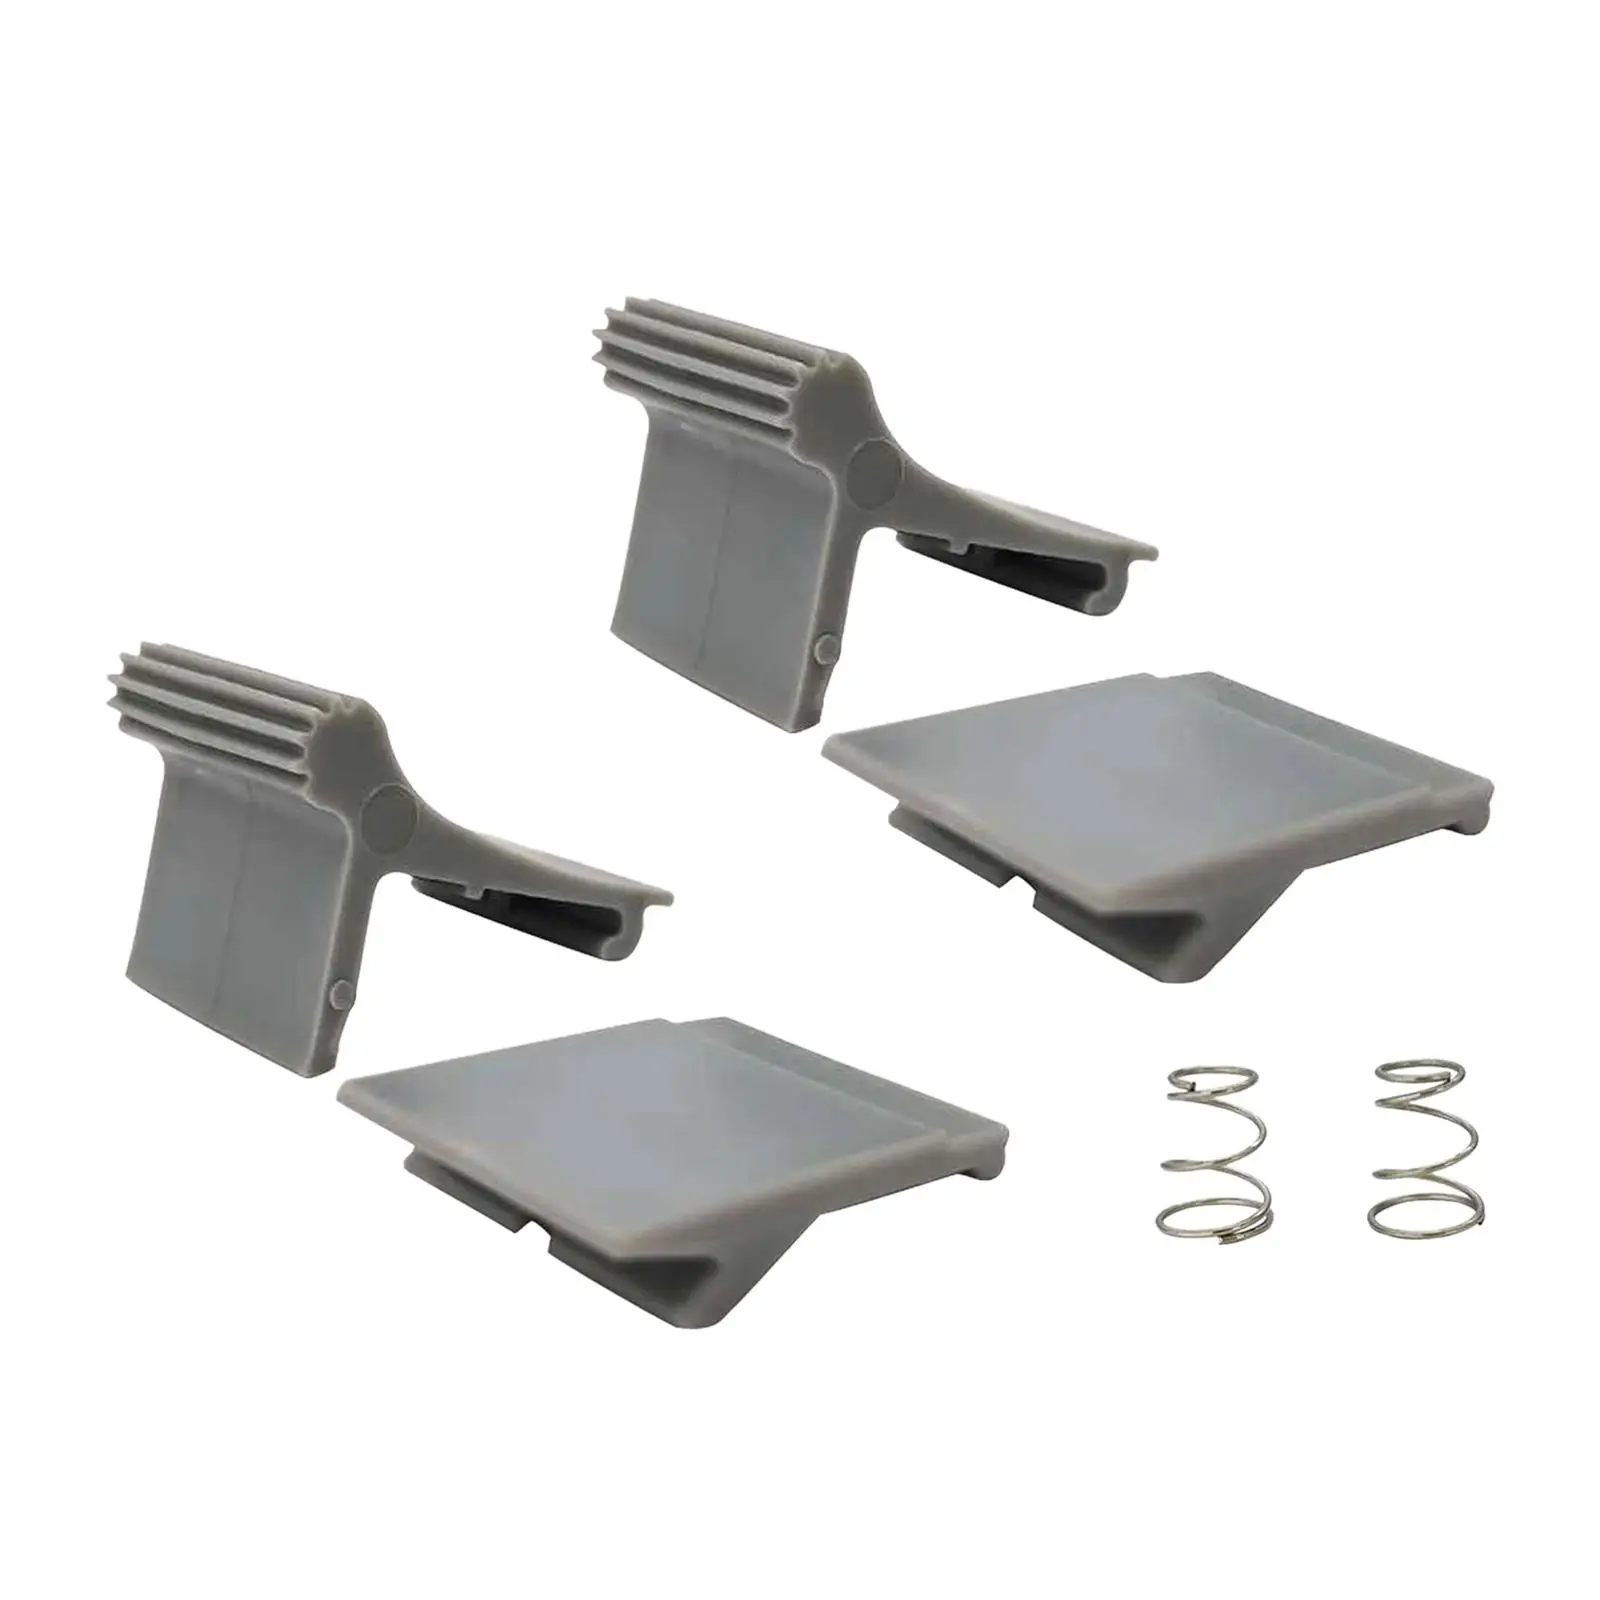 RV Awning Arm Slider Catch Set Assembly with 2 Springs Accessory Replacement Easy Installation for Camper Trailer Motorhome